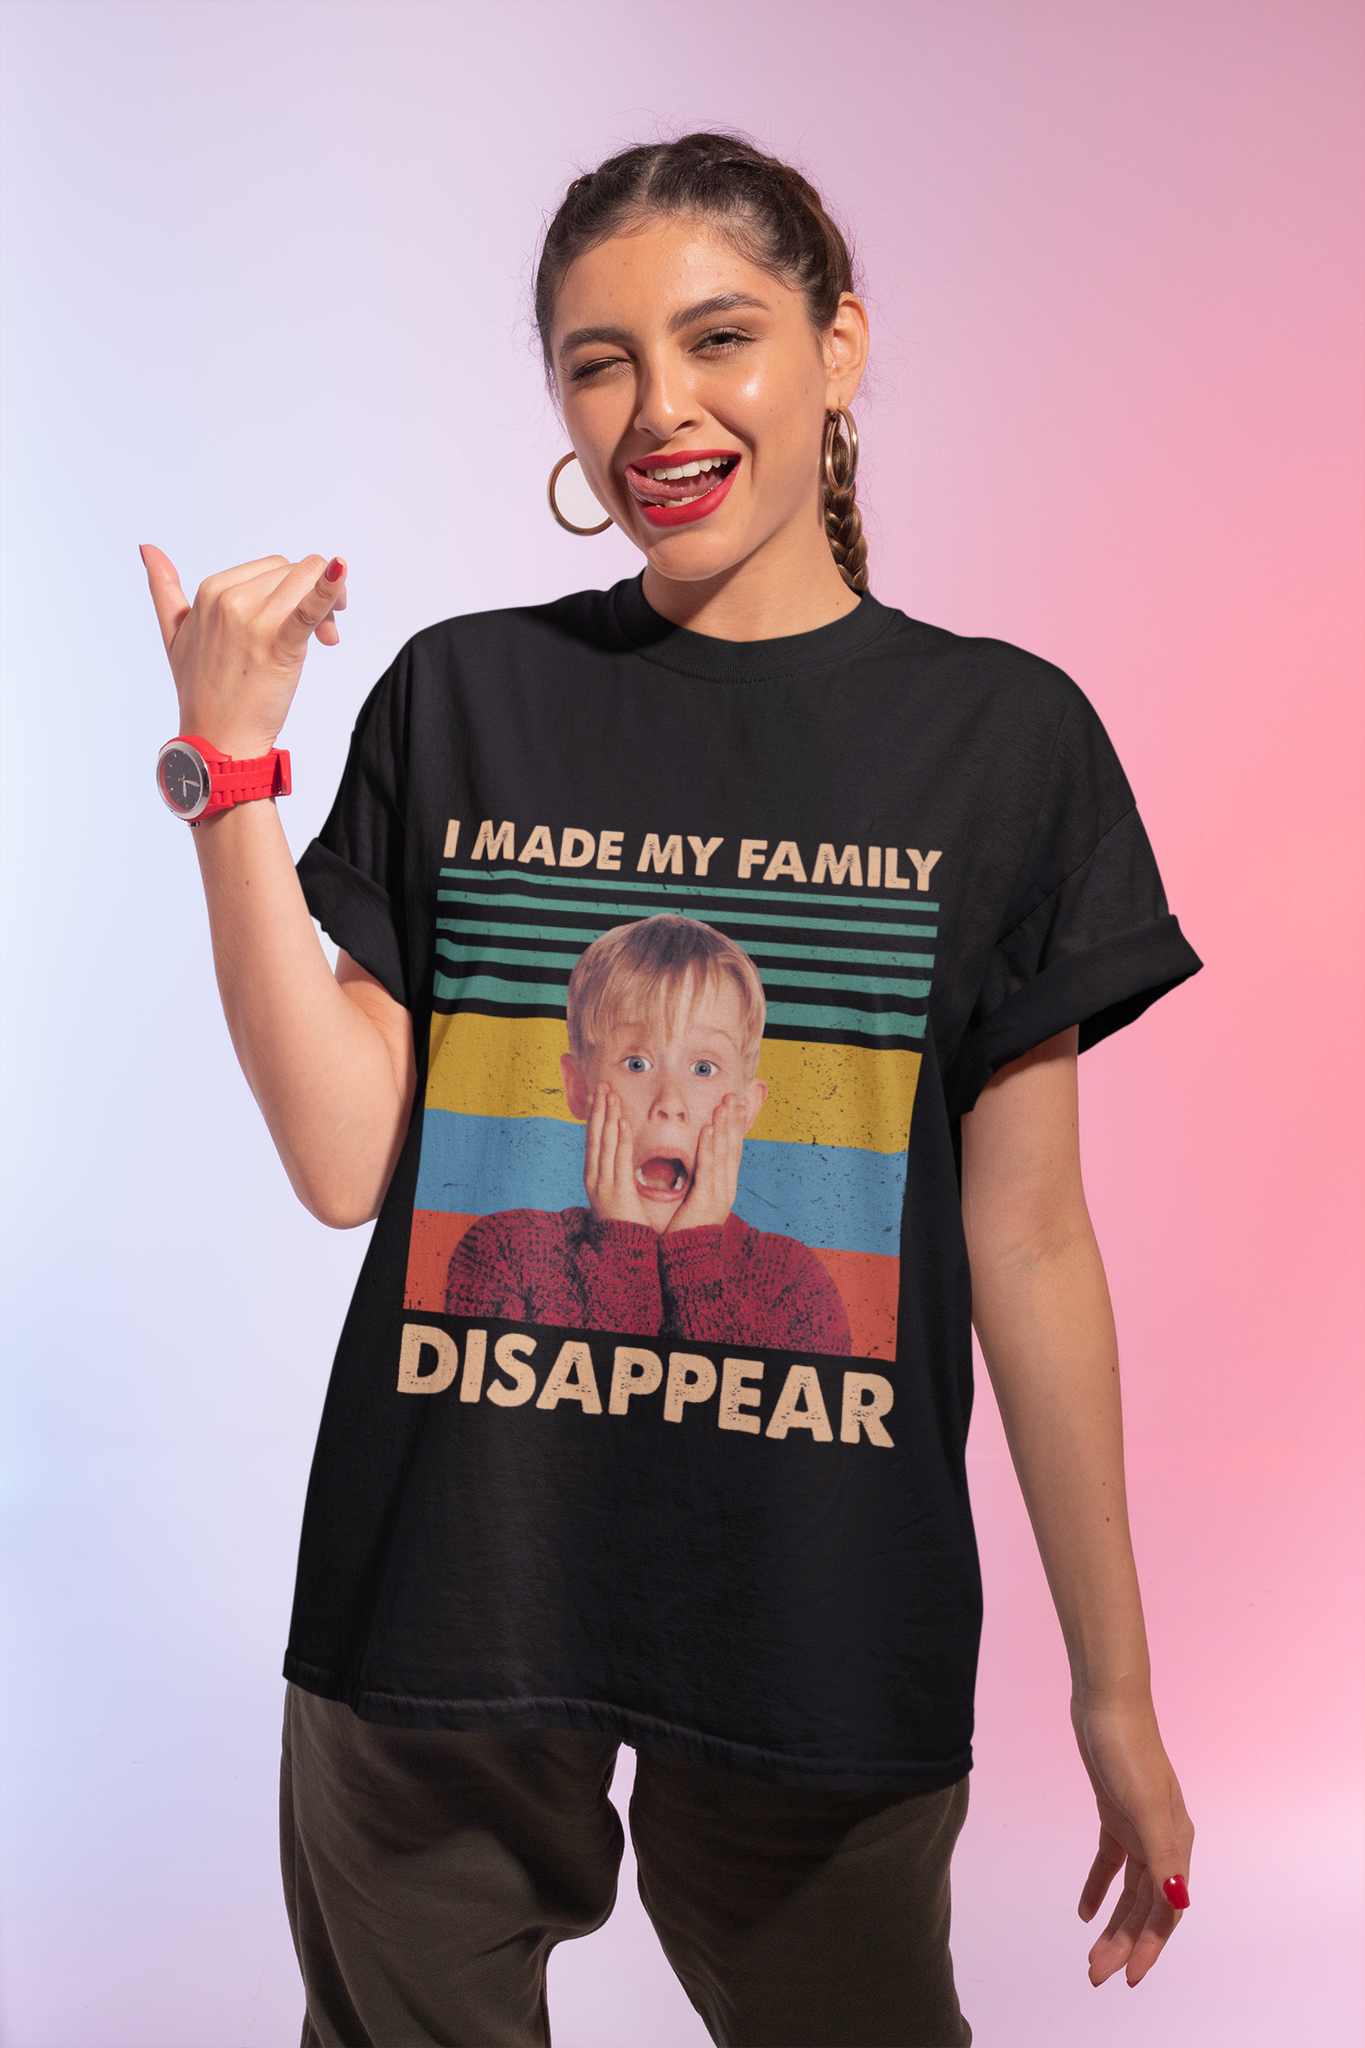 Home Alone Vintage T Shirt, Kevin McCallister Tshirt, I Made My Family Disappear Shirt, Christmas Gifts